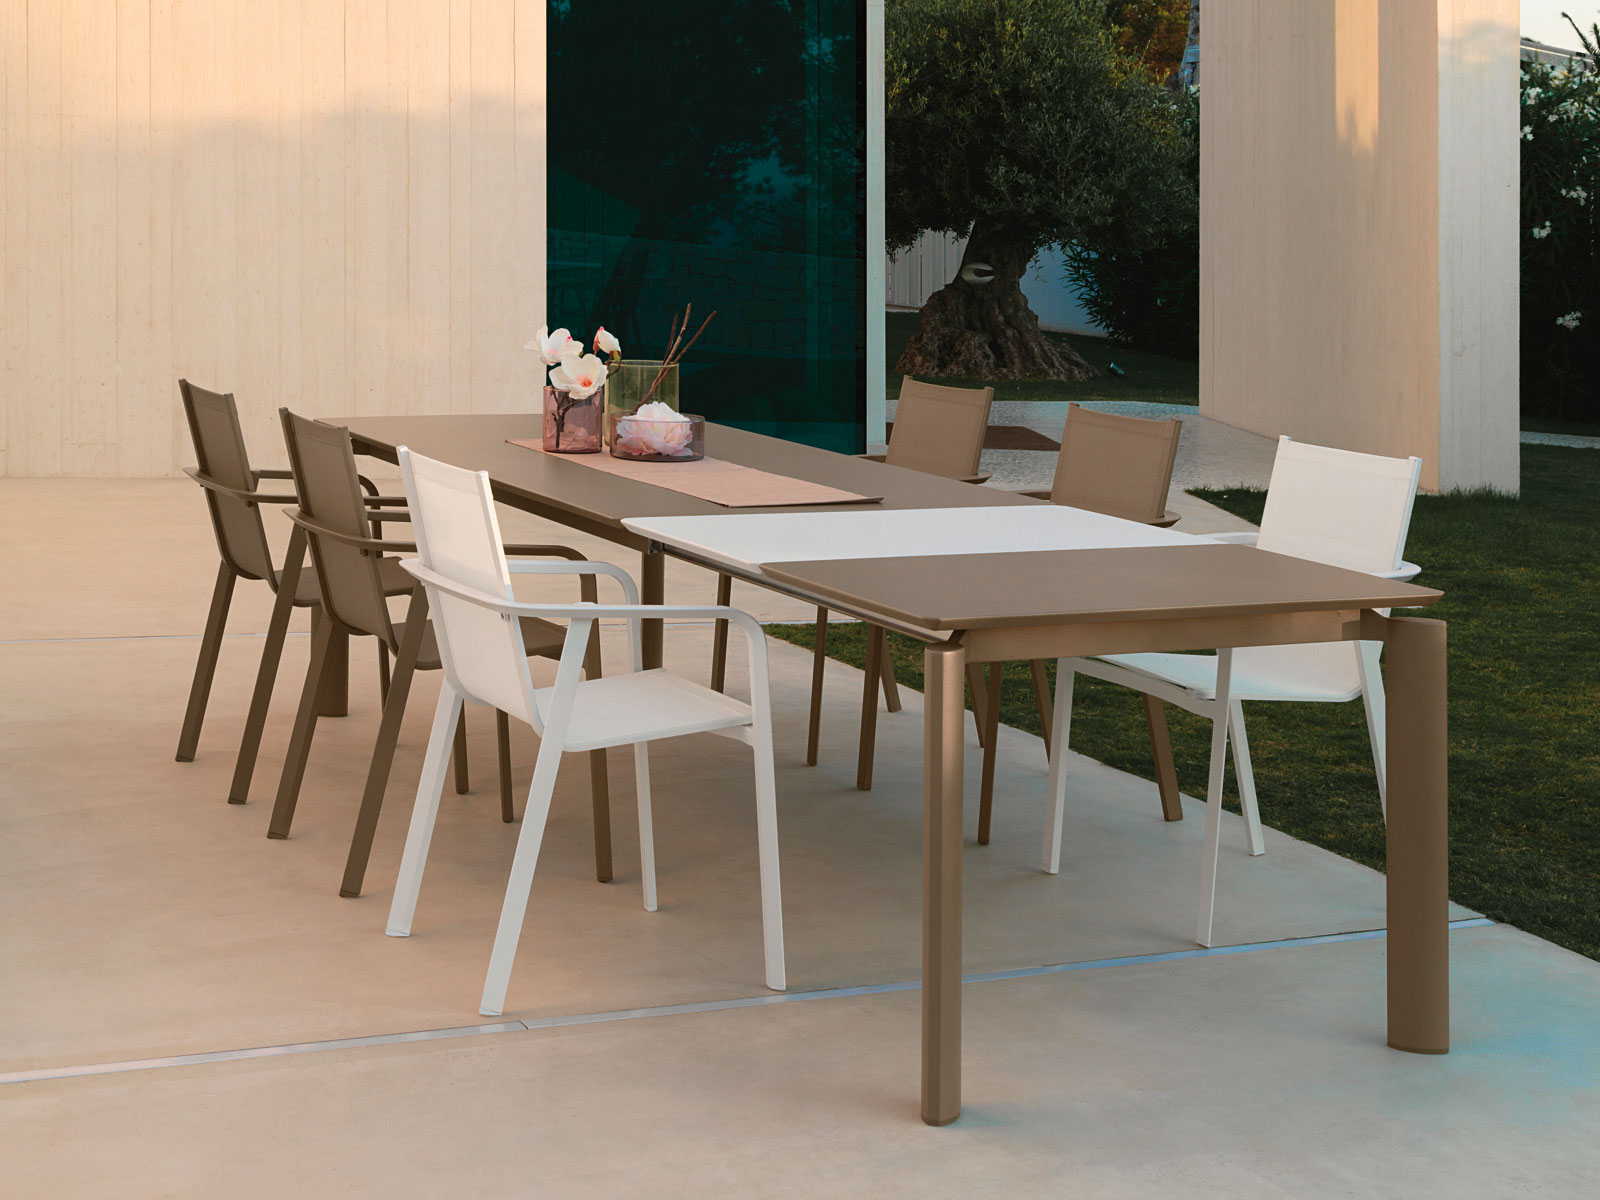 Margot is an aluminum patio dining table designed by Marco Acerbis. Enhance your outdoor furnishings with this modern and elegant aluminum outdoor dining table.